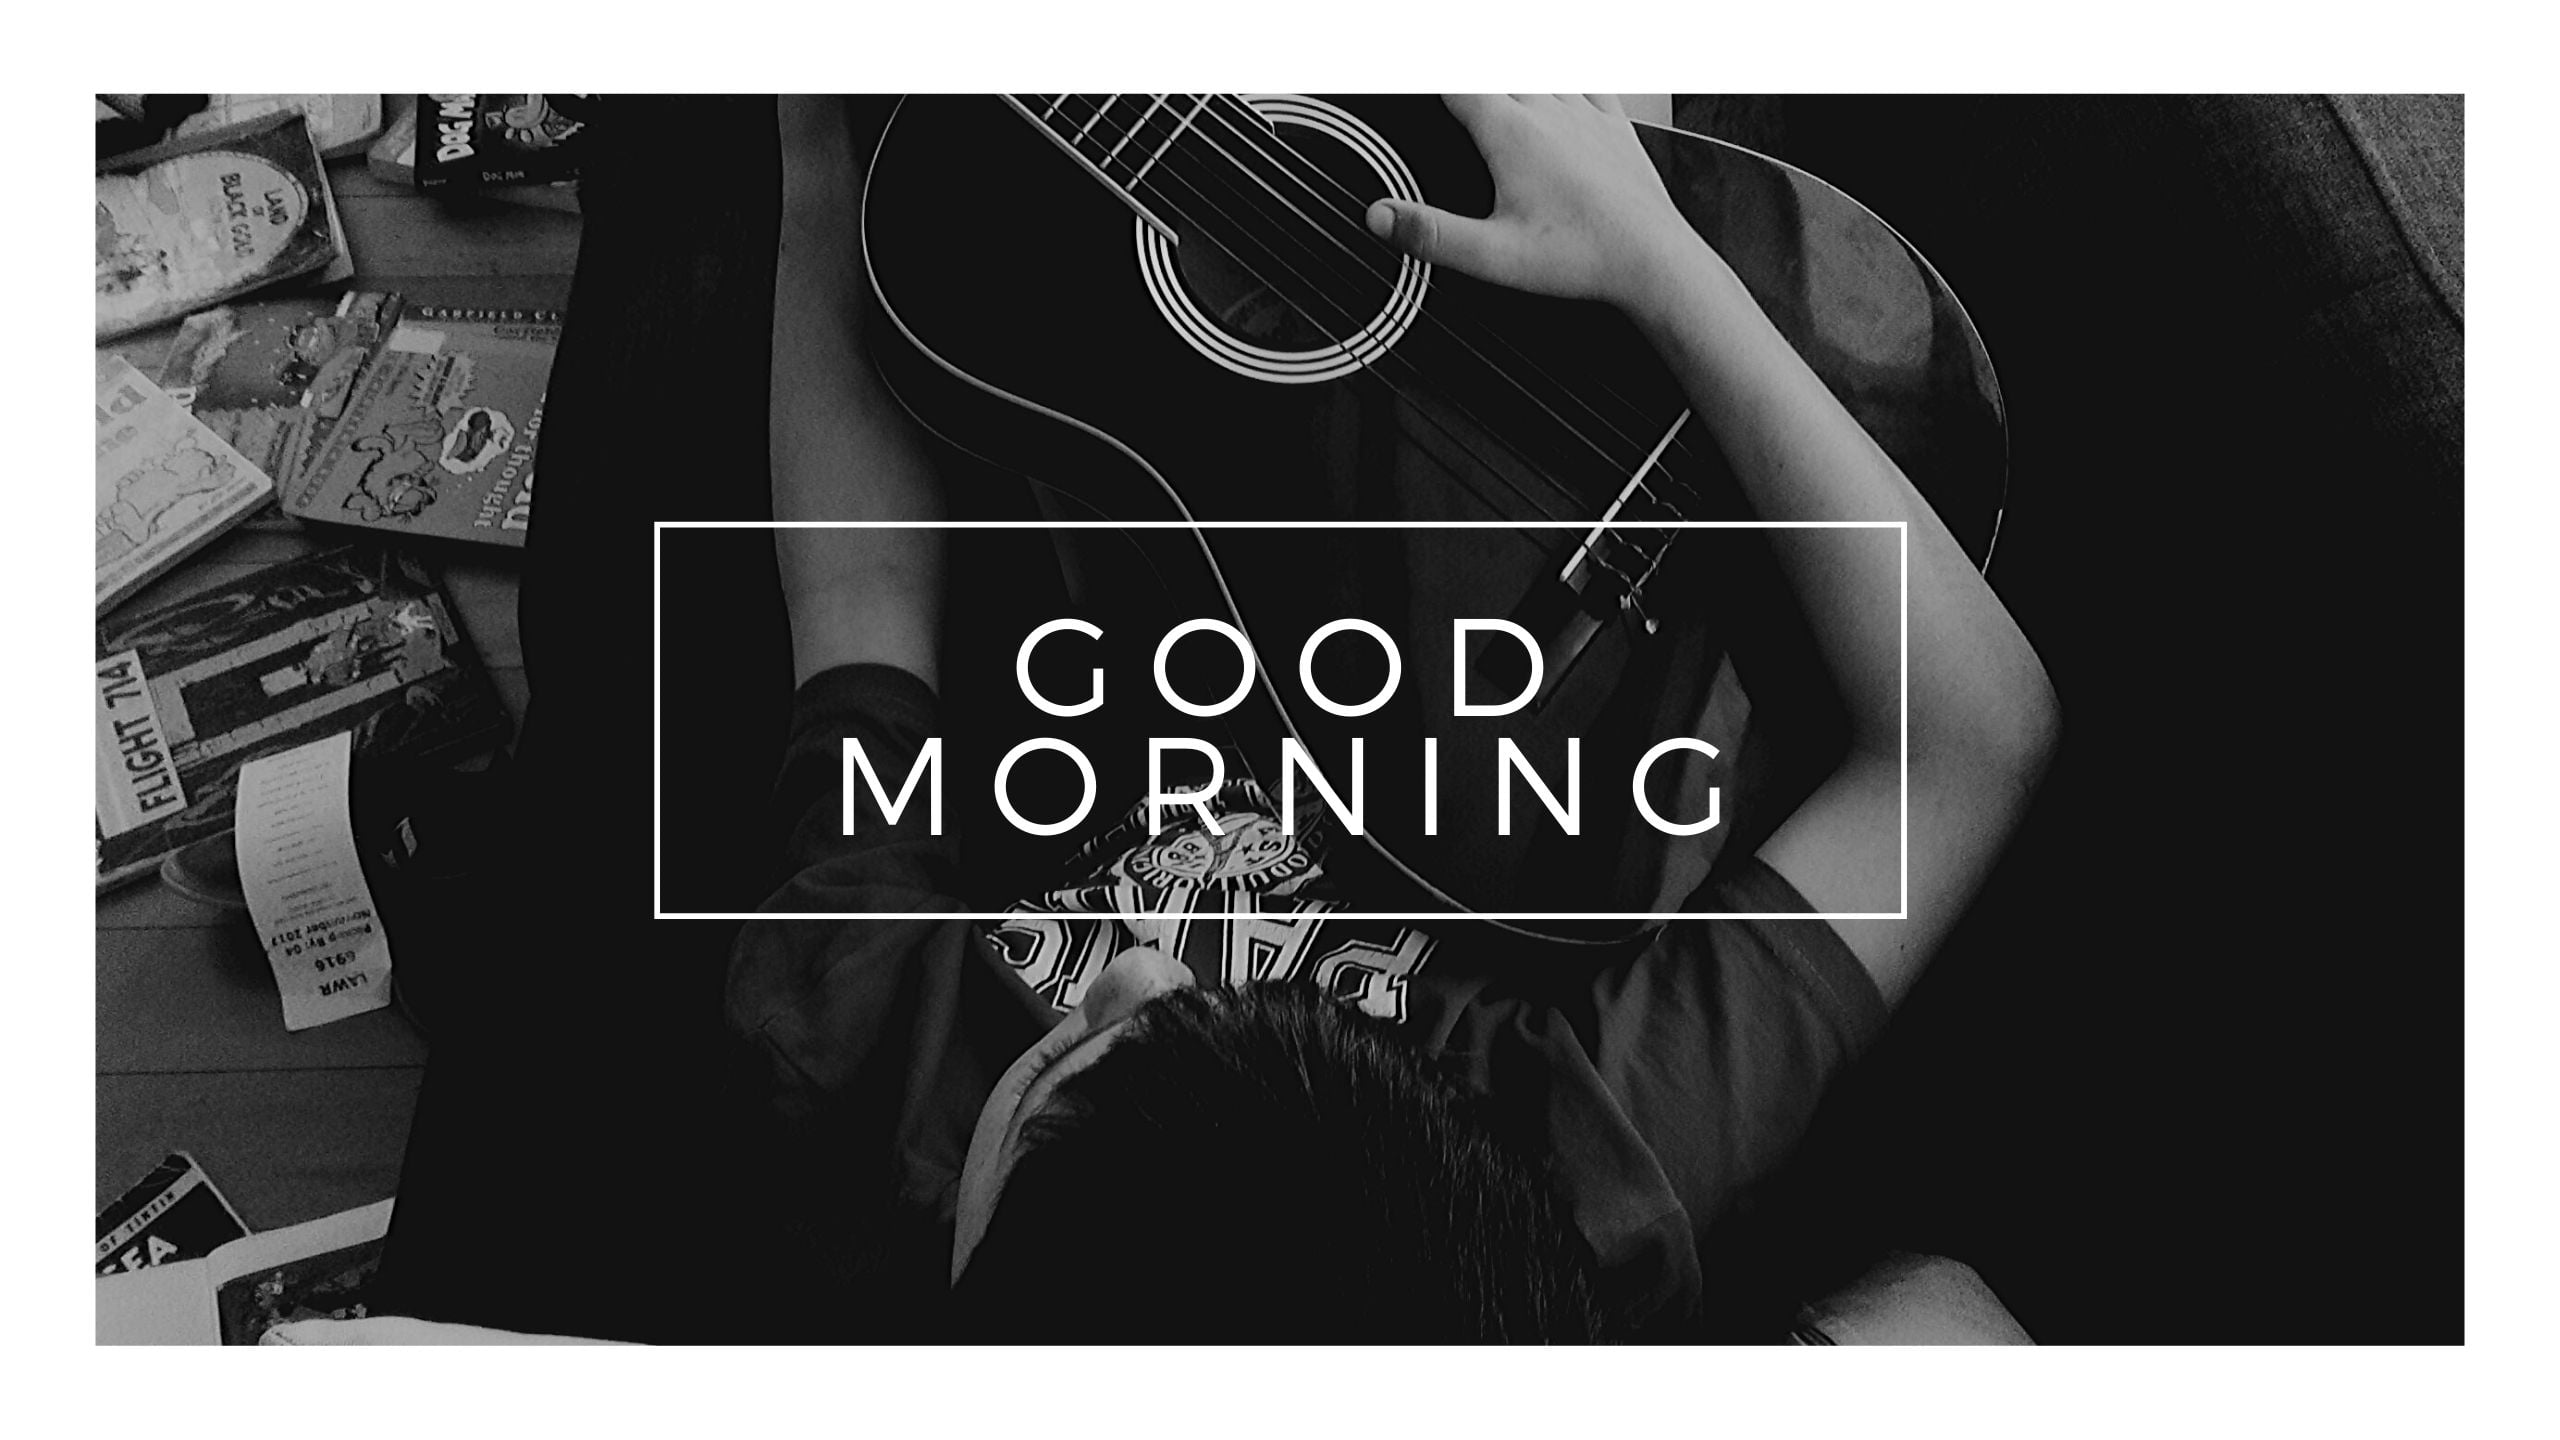 Good Morning with Guiter Image full HD free download.